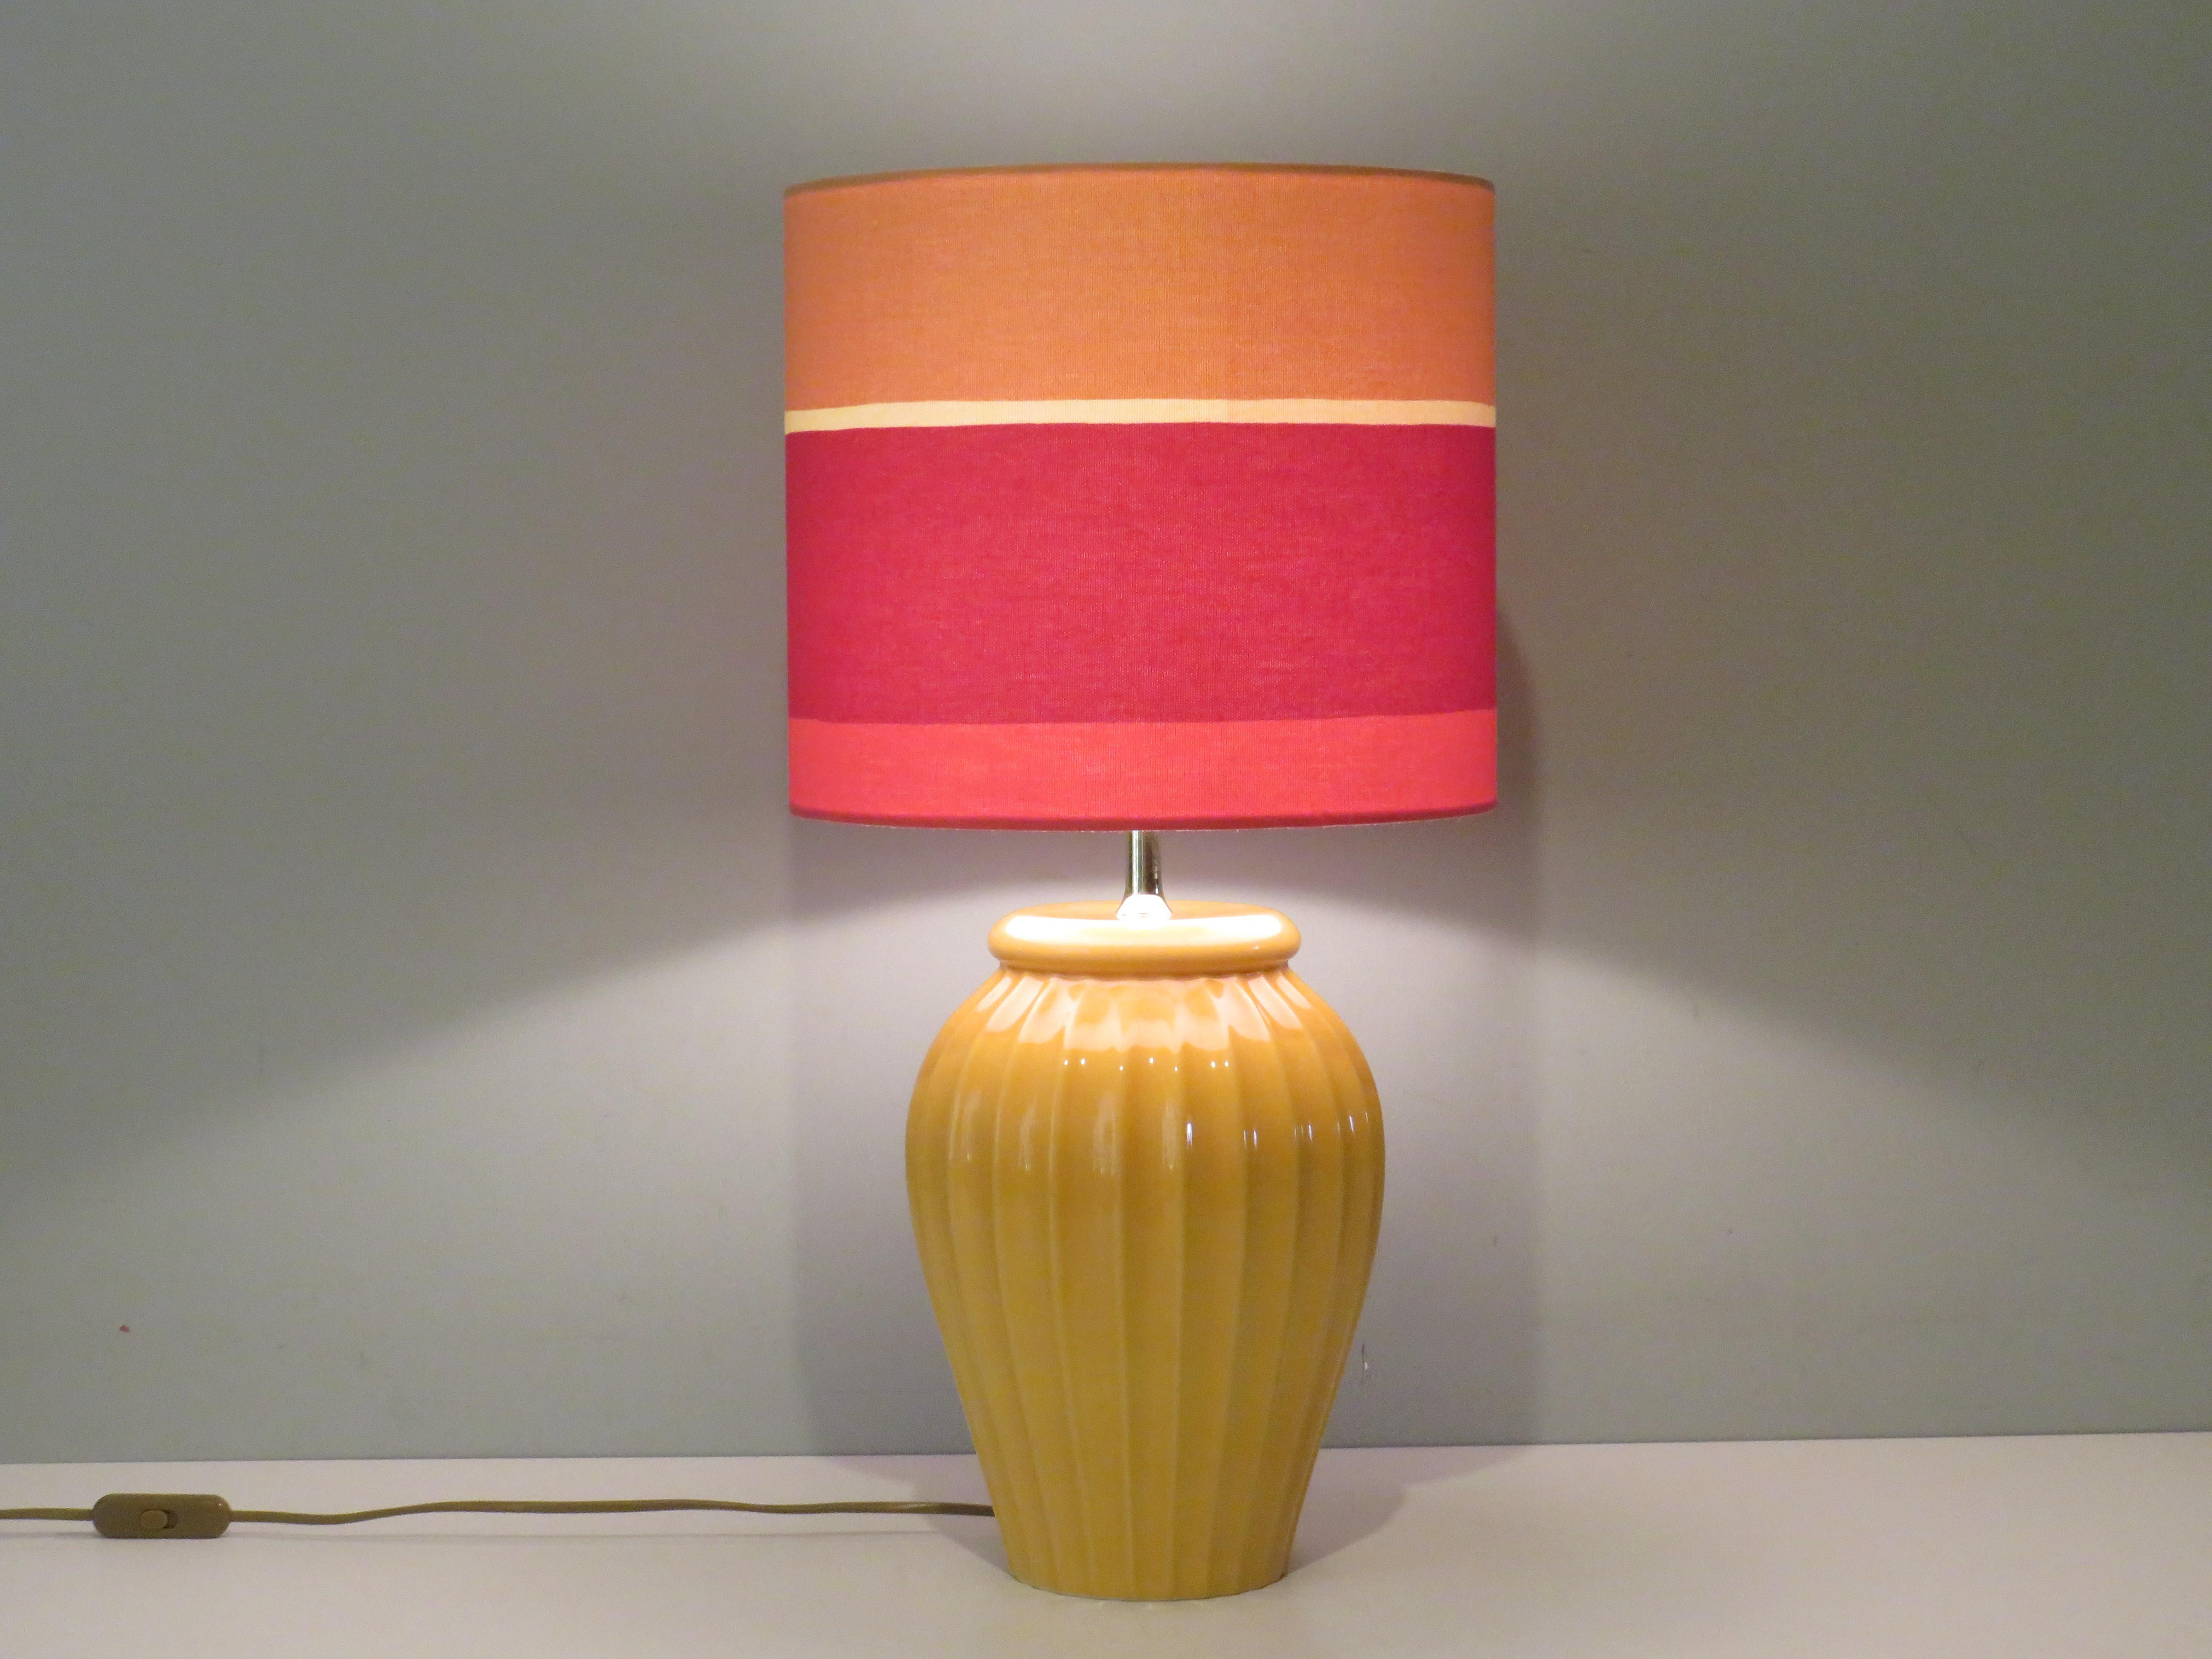 This beautifully shaped and ribbed vintage ceramic lamp base is fitted with a new, custom-made lampshade.
The height of the lamp base is 39 cm and the diameter is 26.5 cm.
The lampshade is 26.5 cm high and has a diameter of 20 cm.
The total